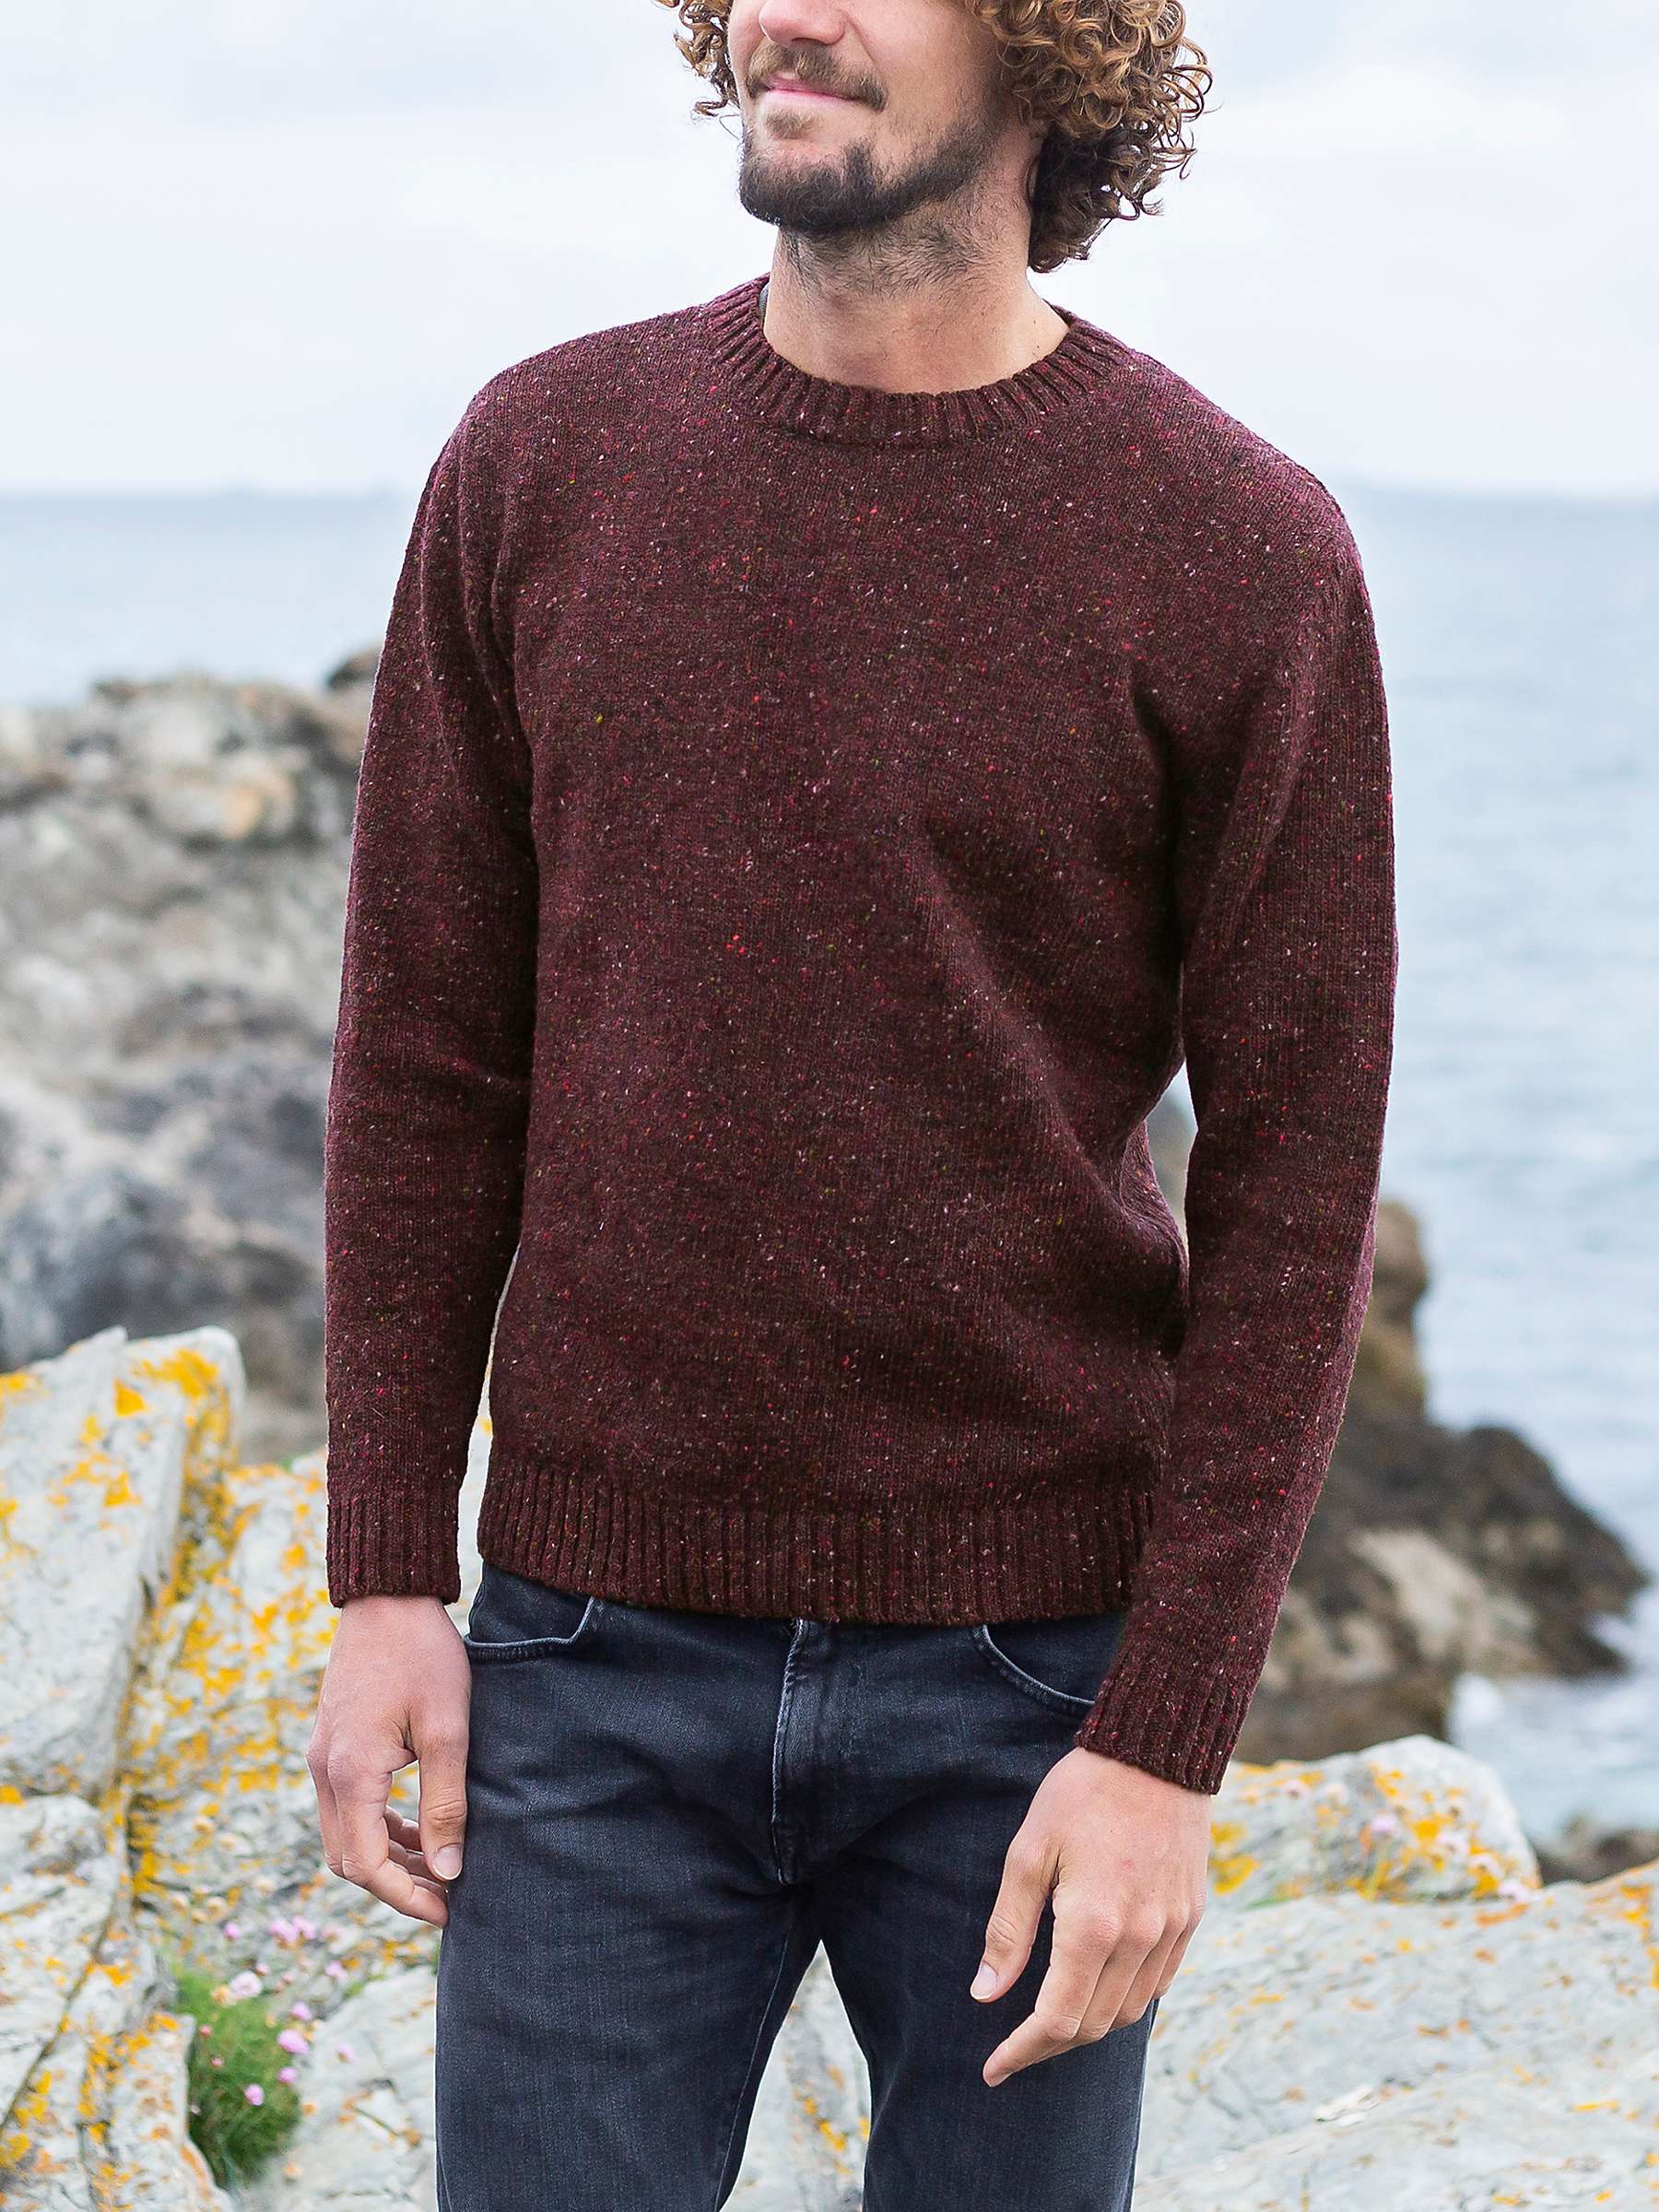 Buy Celtic & Co. Donegal Shawl Collar Wool Jumper Online at johnlewis.com